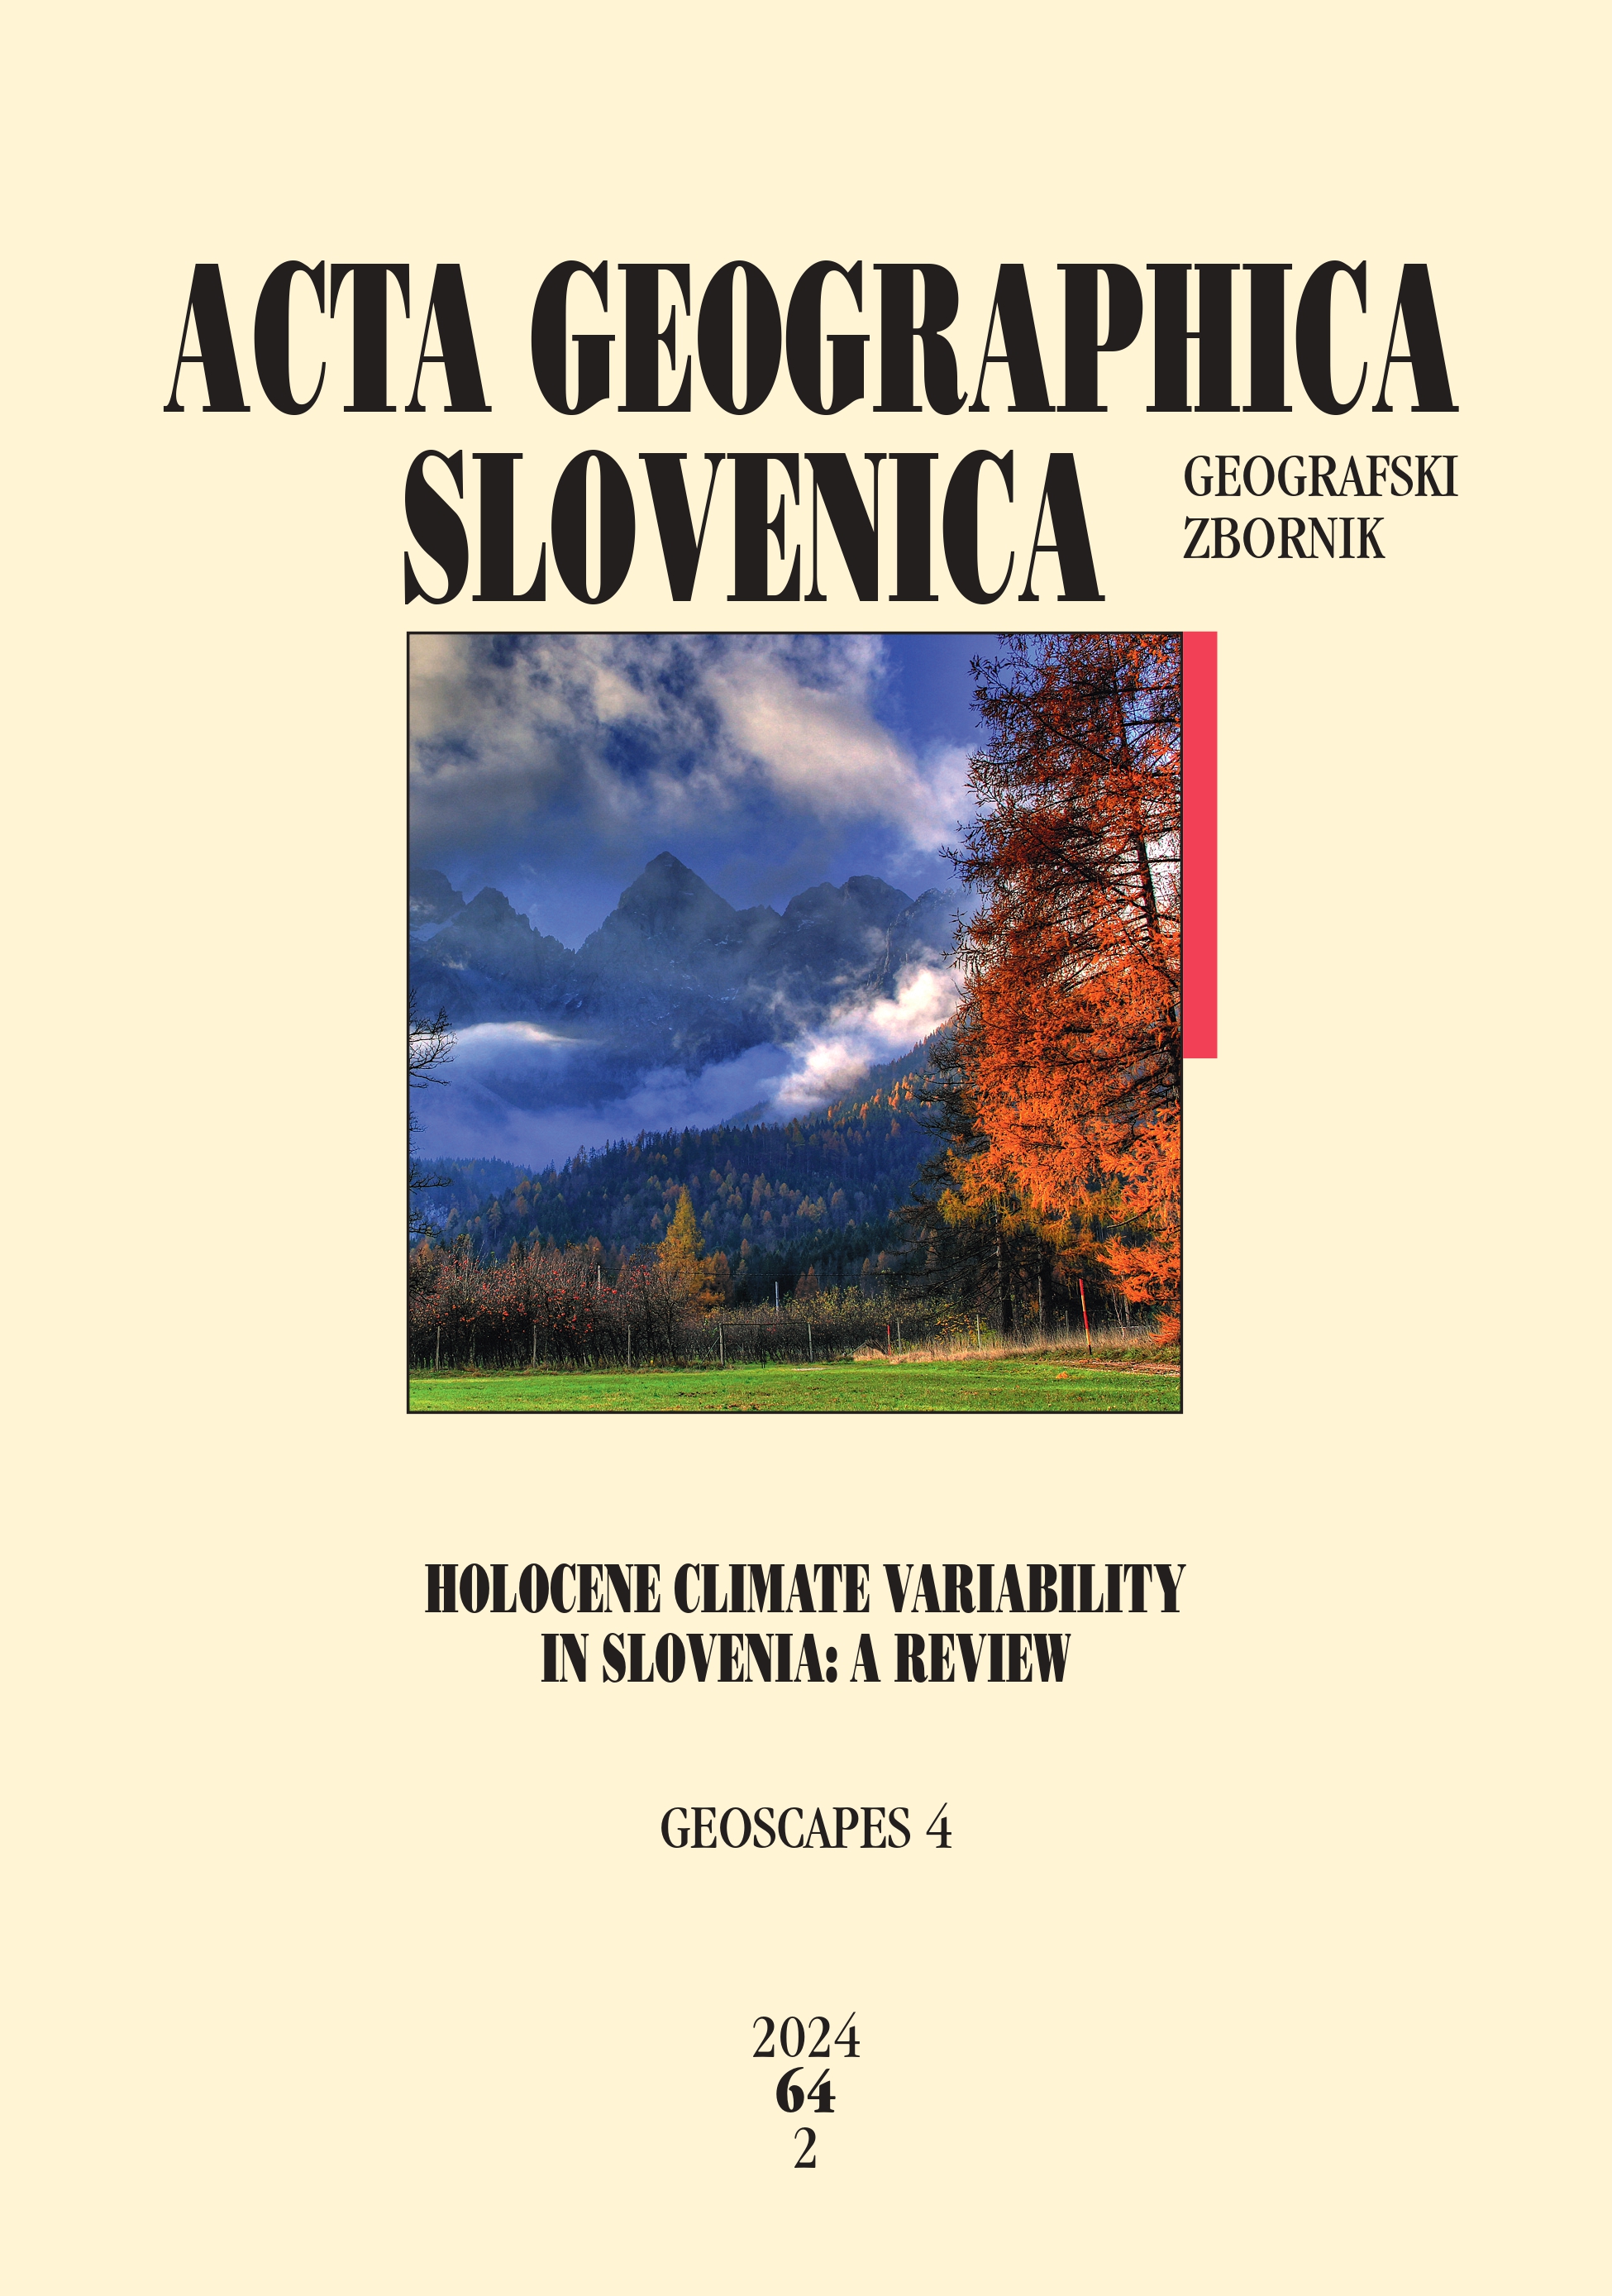 					View Vol. 64 No. 2 (2024): Geoscapes 4: Holocene climate variability in Slovenia: A review
				